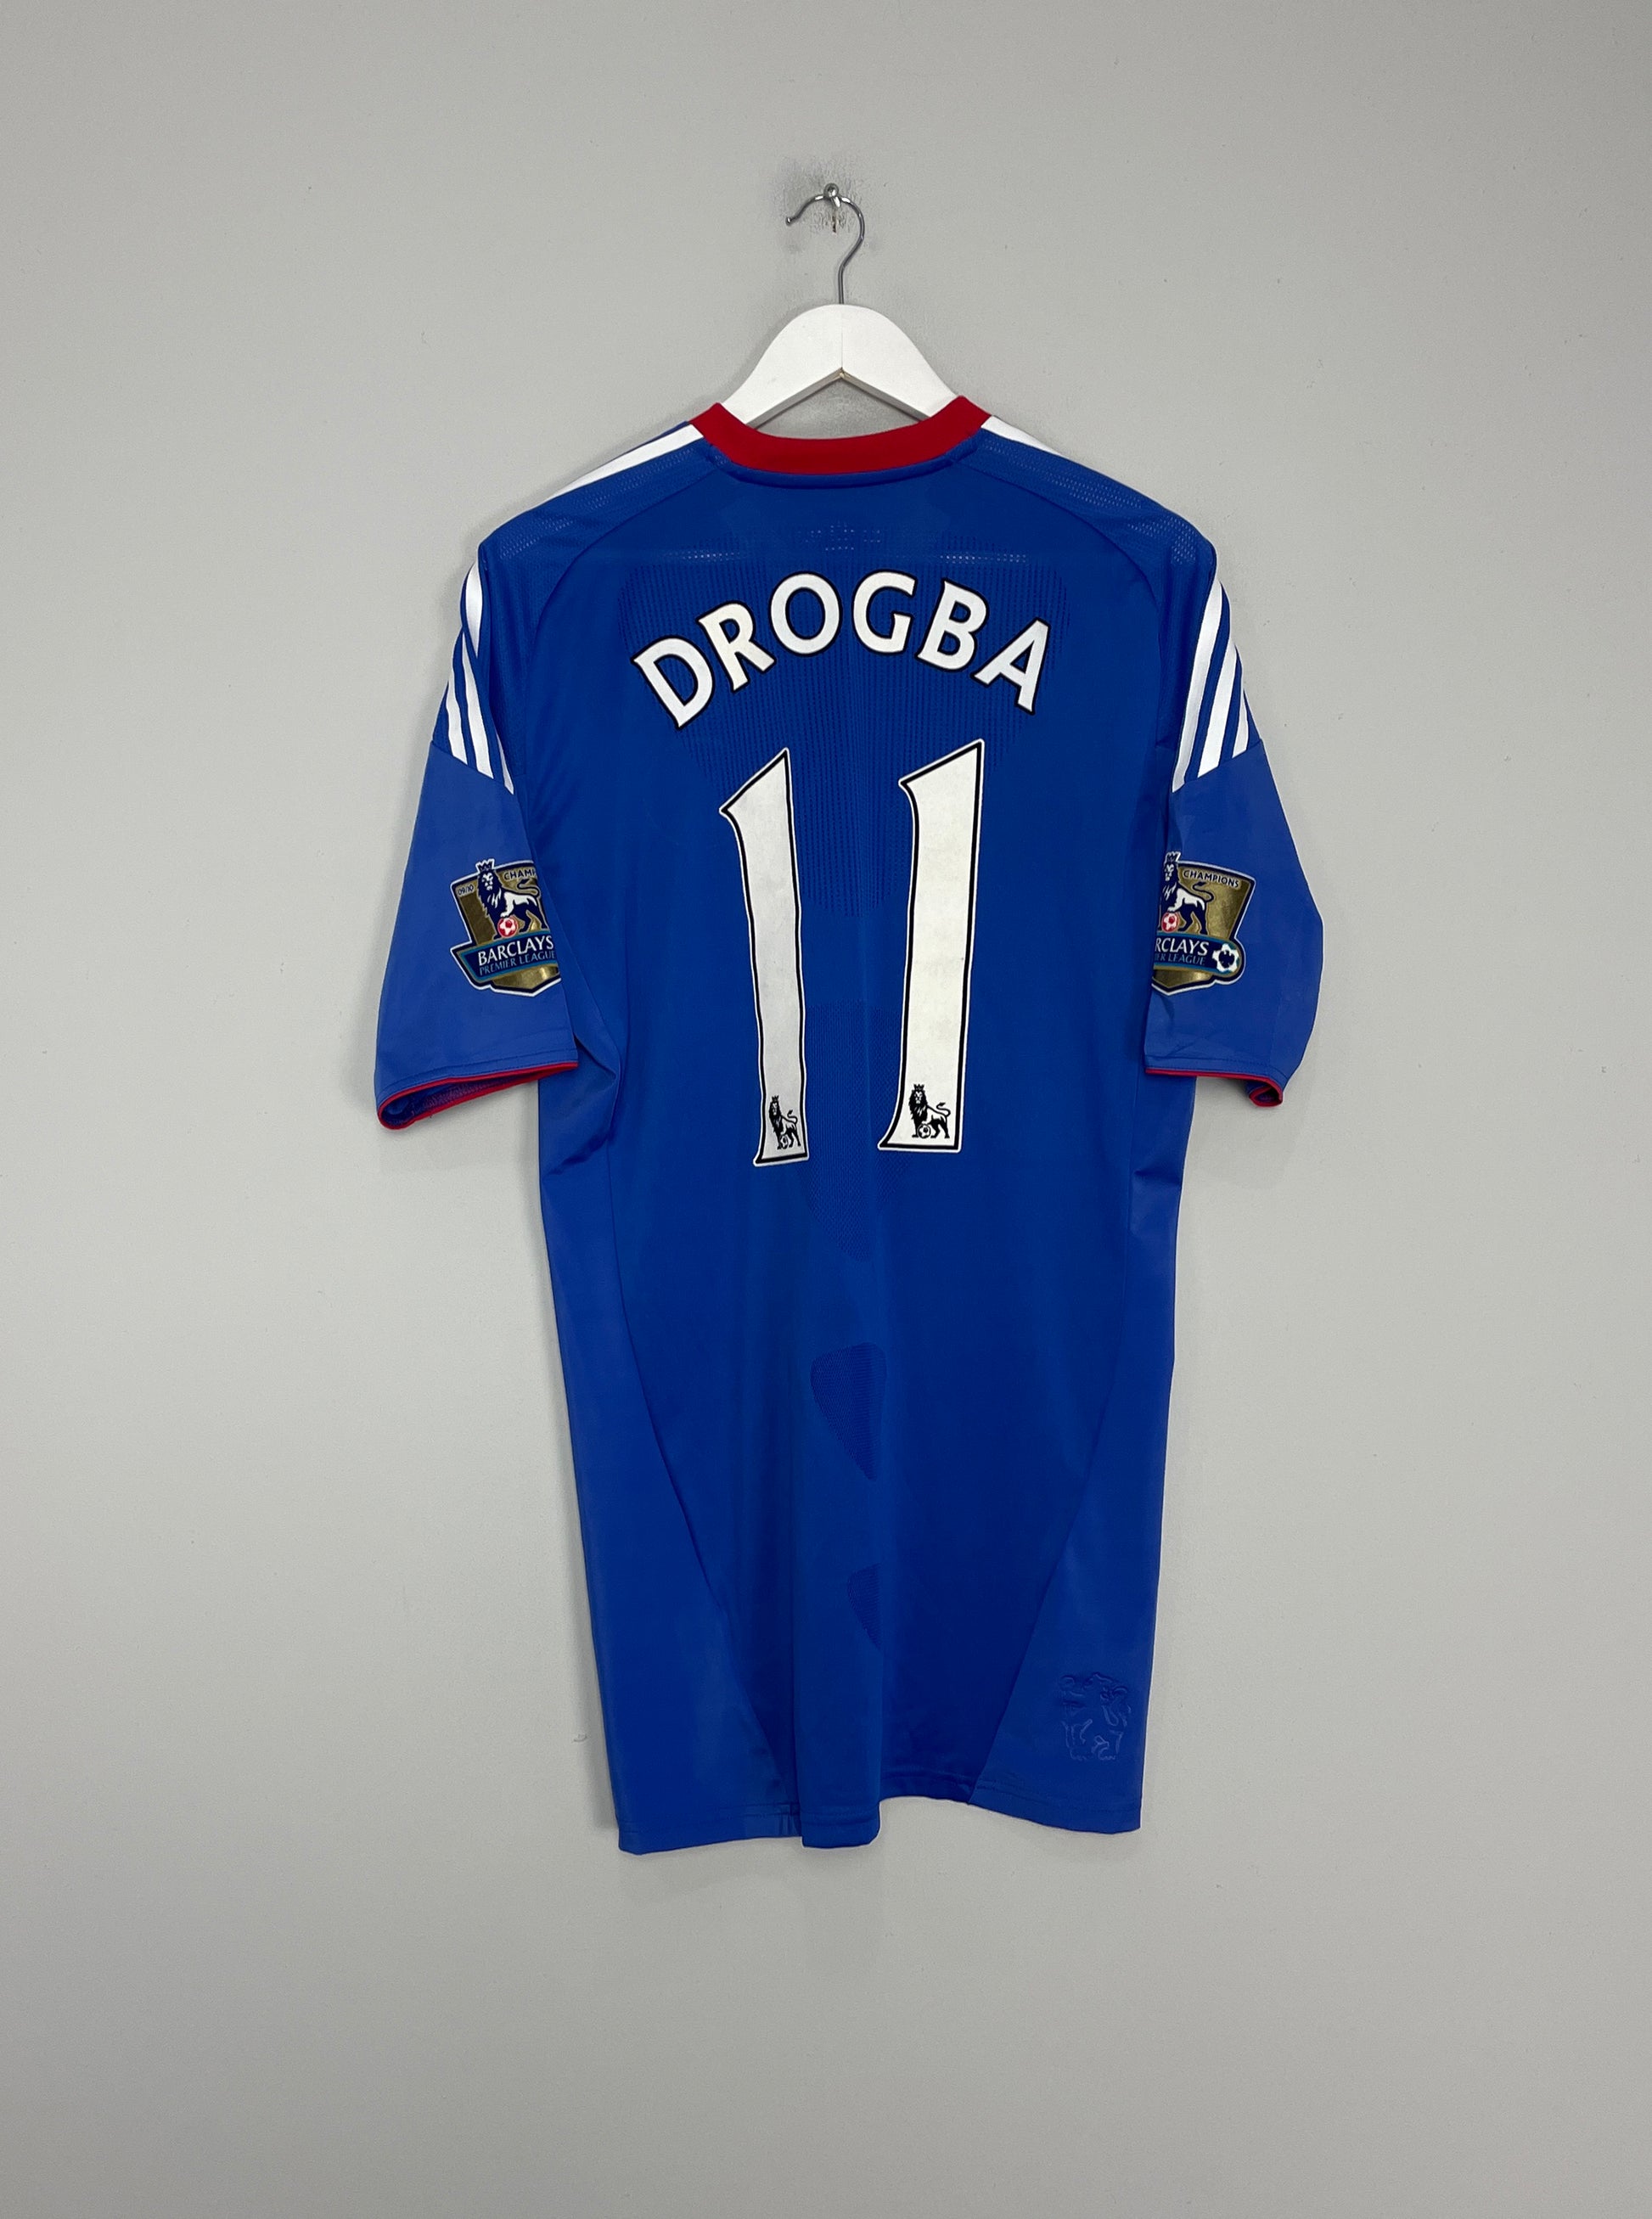 CULT KITS - 2010/11 CHELSEA DROGBA #11 *MATCH ISSUE* HOME SHIRT